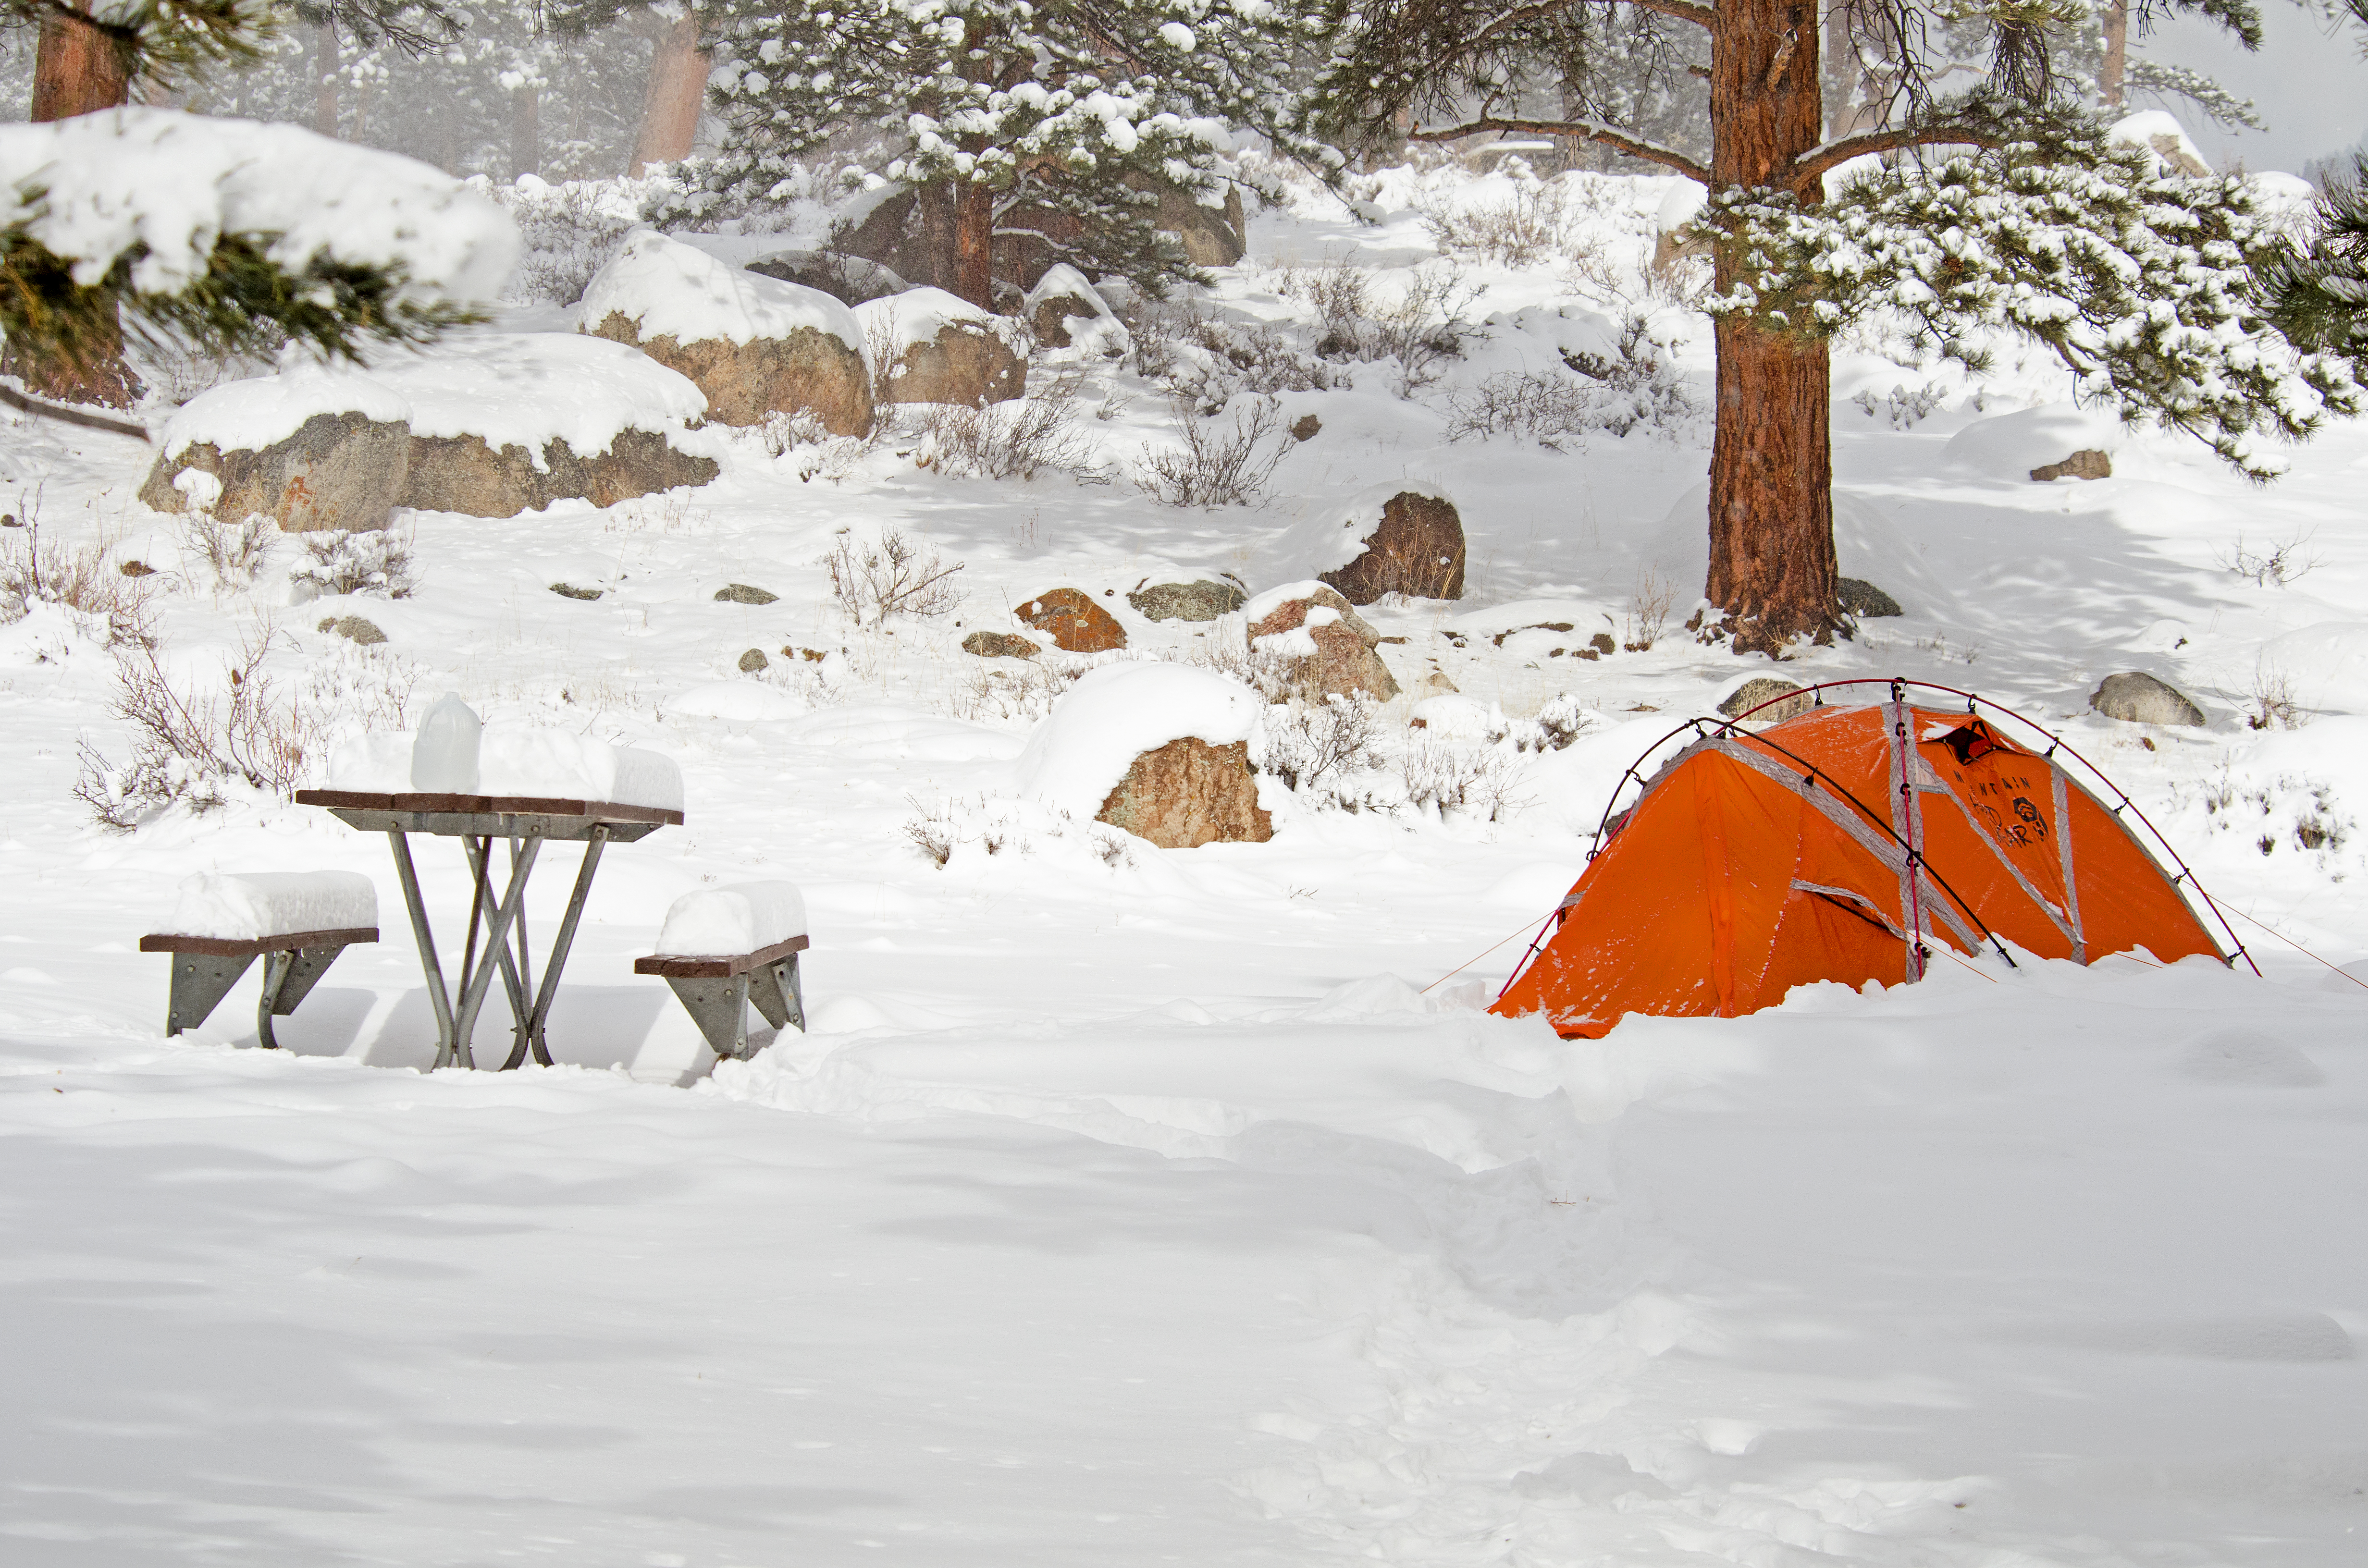 https://www.nps.gov/romo/planyourvisit/images/RMNP-26-Winter-Camping-Moraine-Park-Campground.jpg